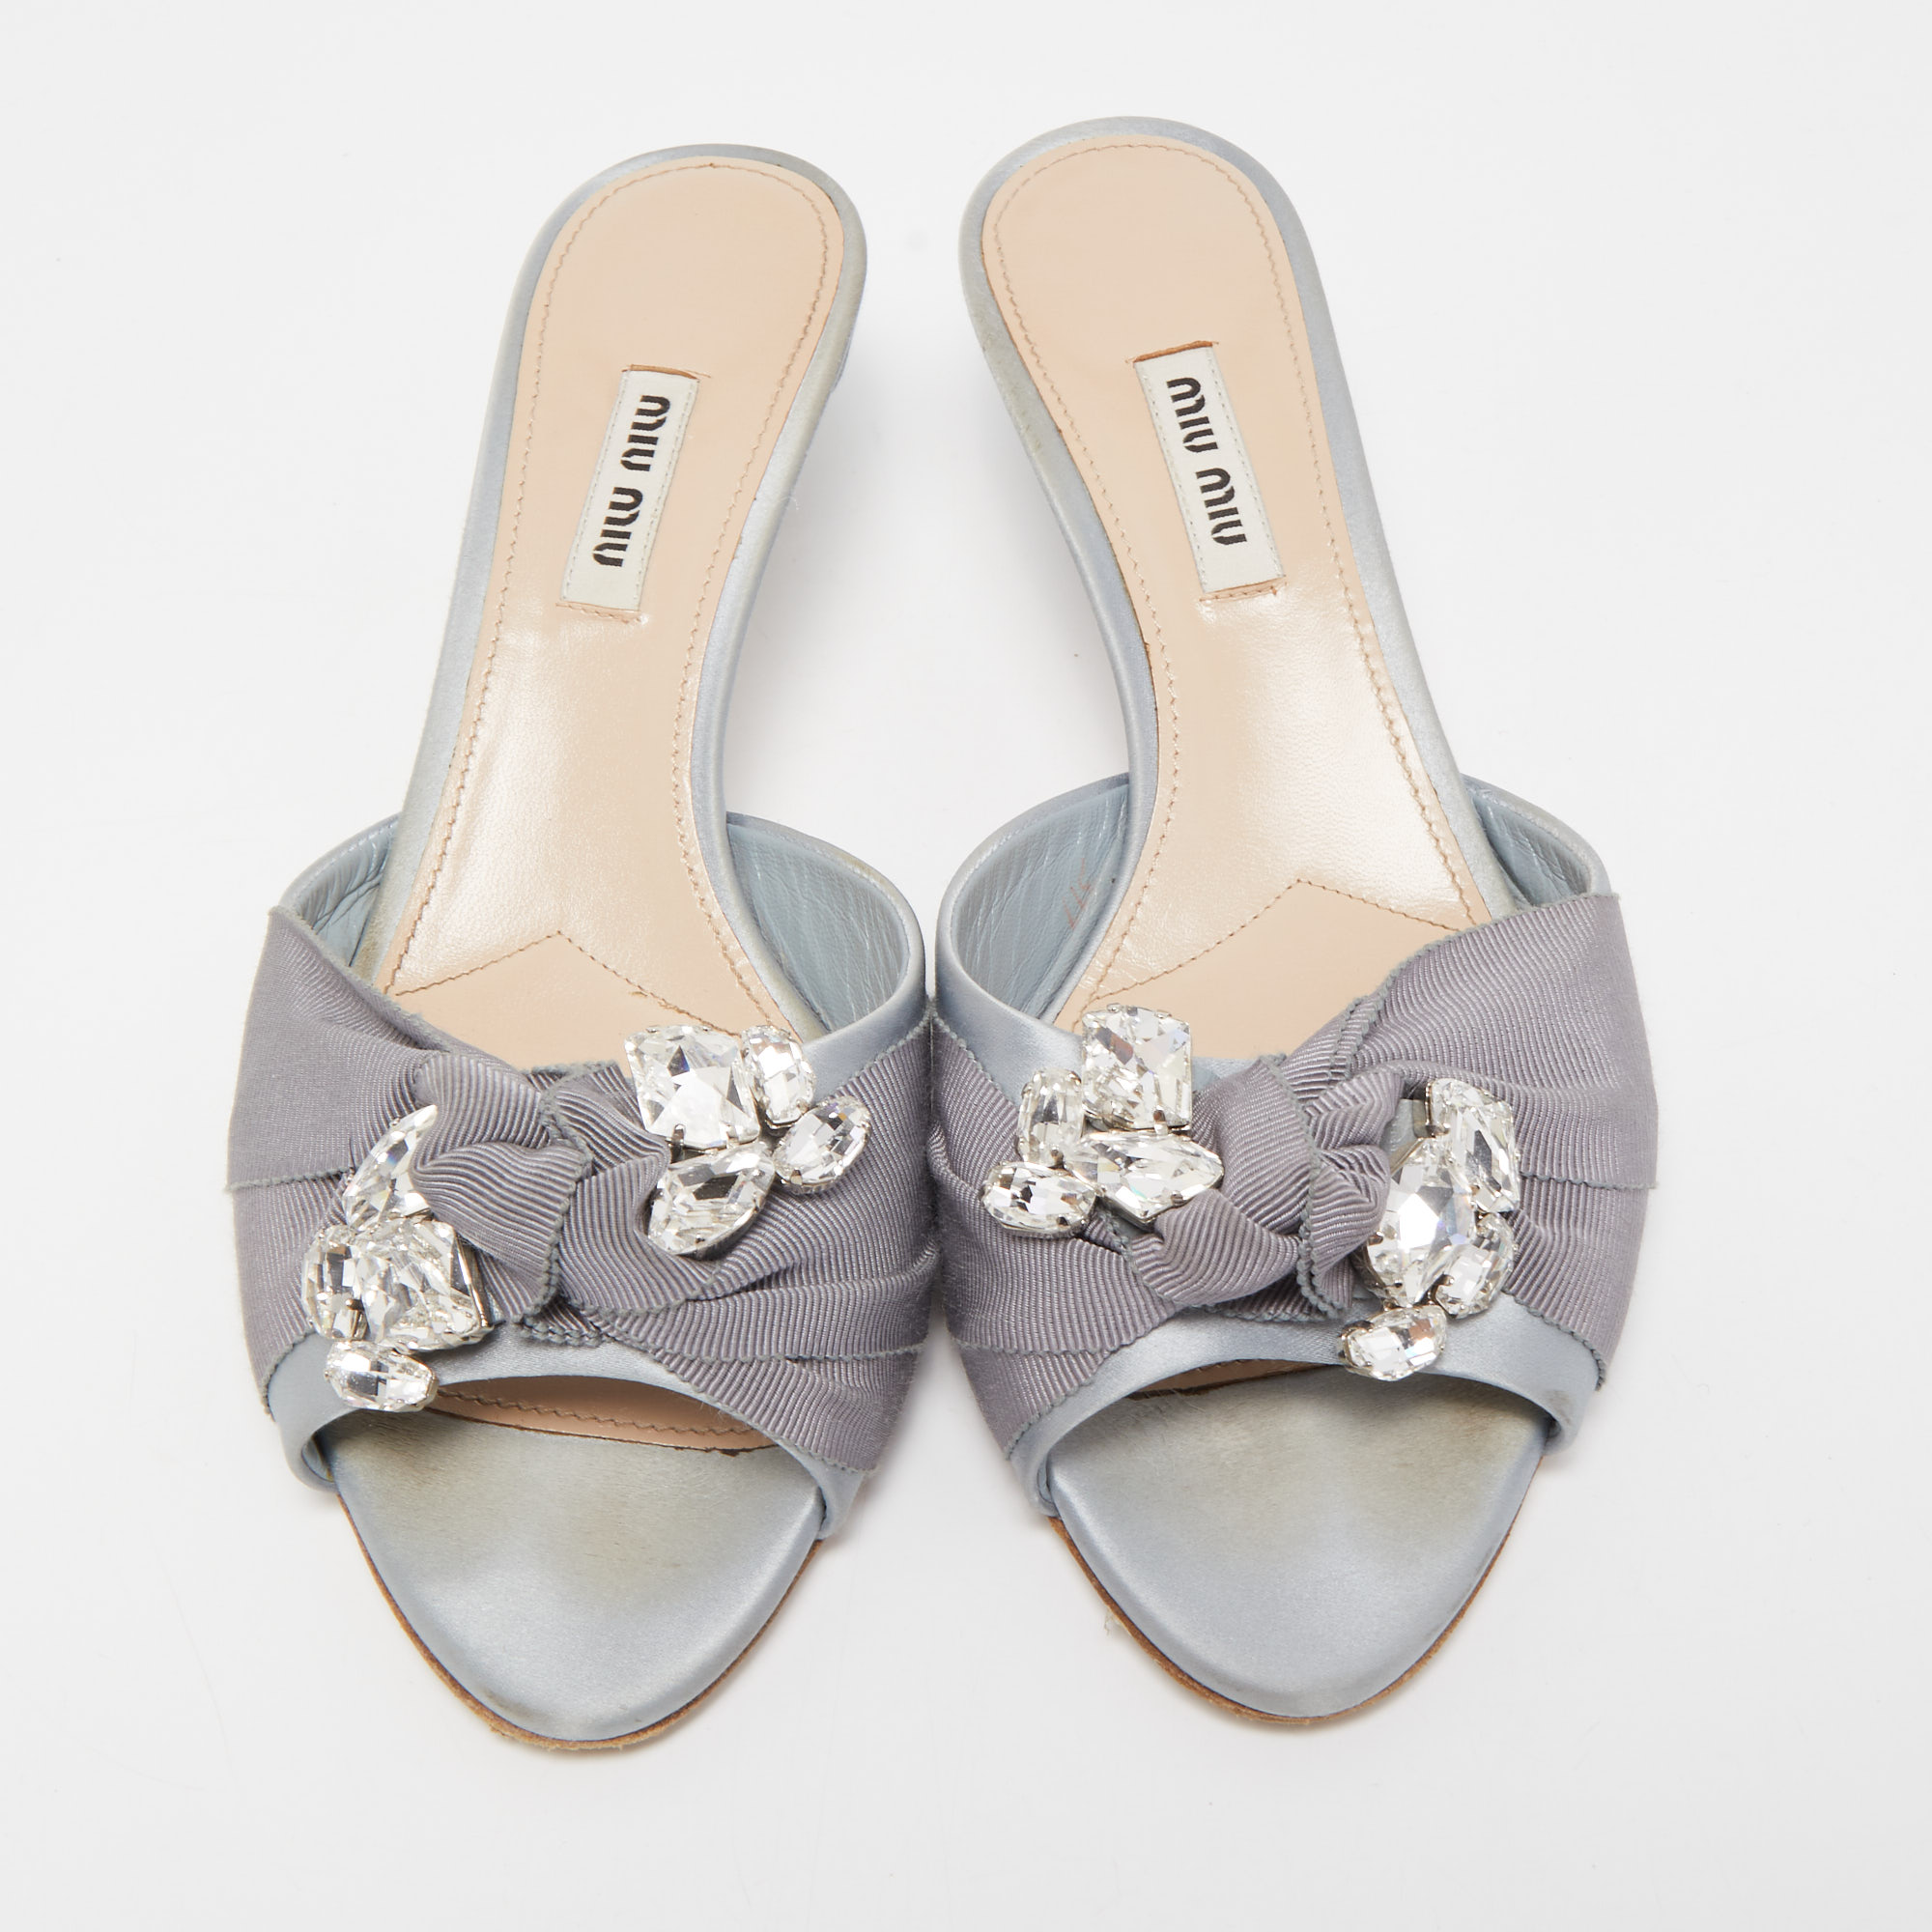 Miu Miu Two Tone Satin And Knotted Canvas Crystal Embellished Slide Sandals Size 39